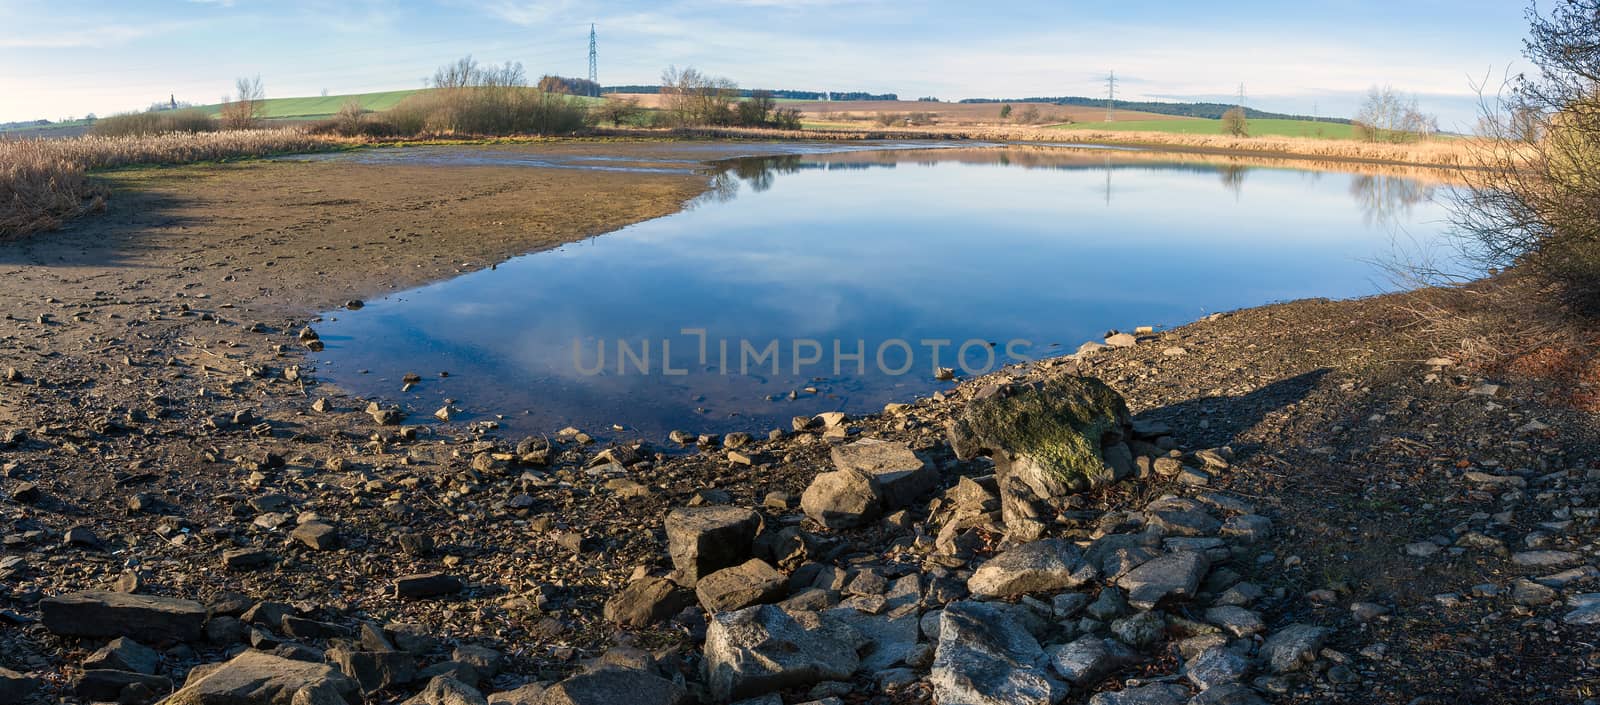 drained pond in winter by artush